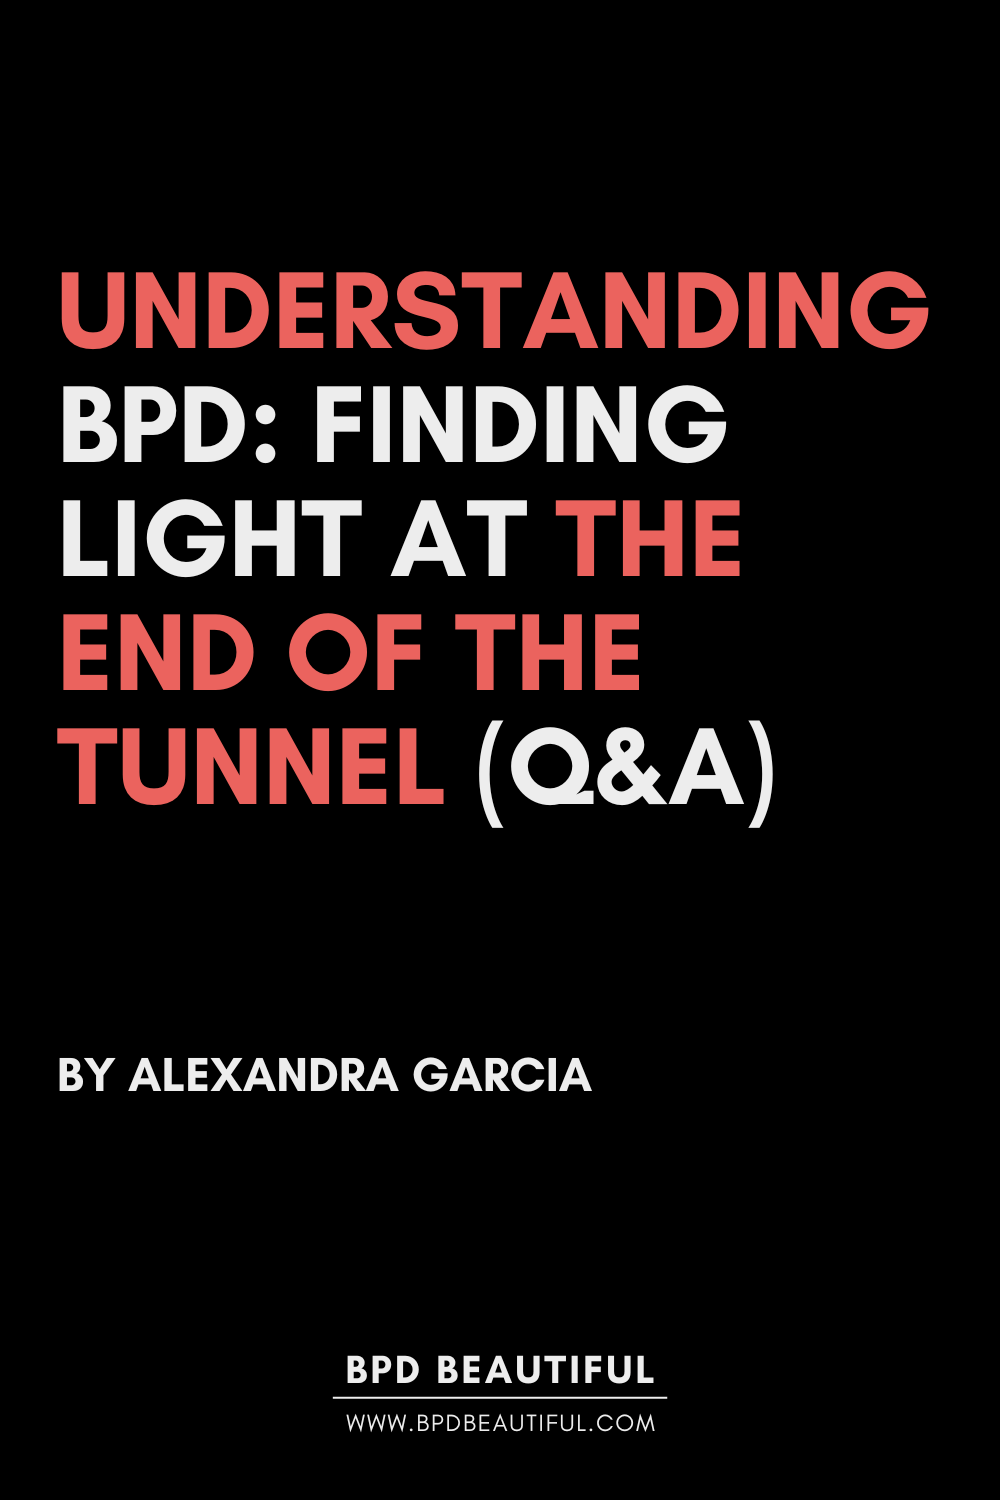 understanding bpd: finding the light at the end of the tunnel